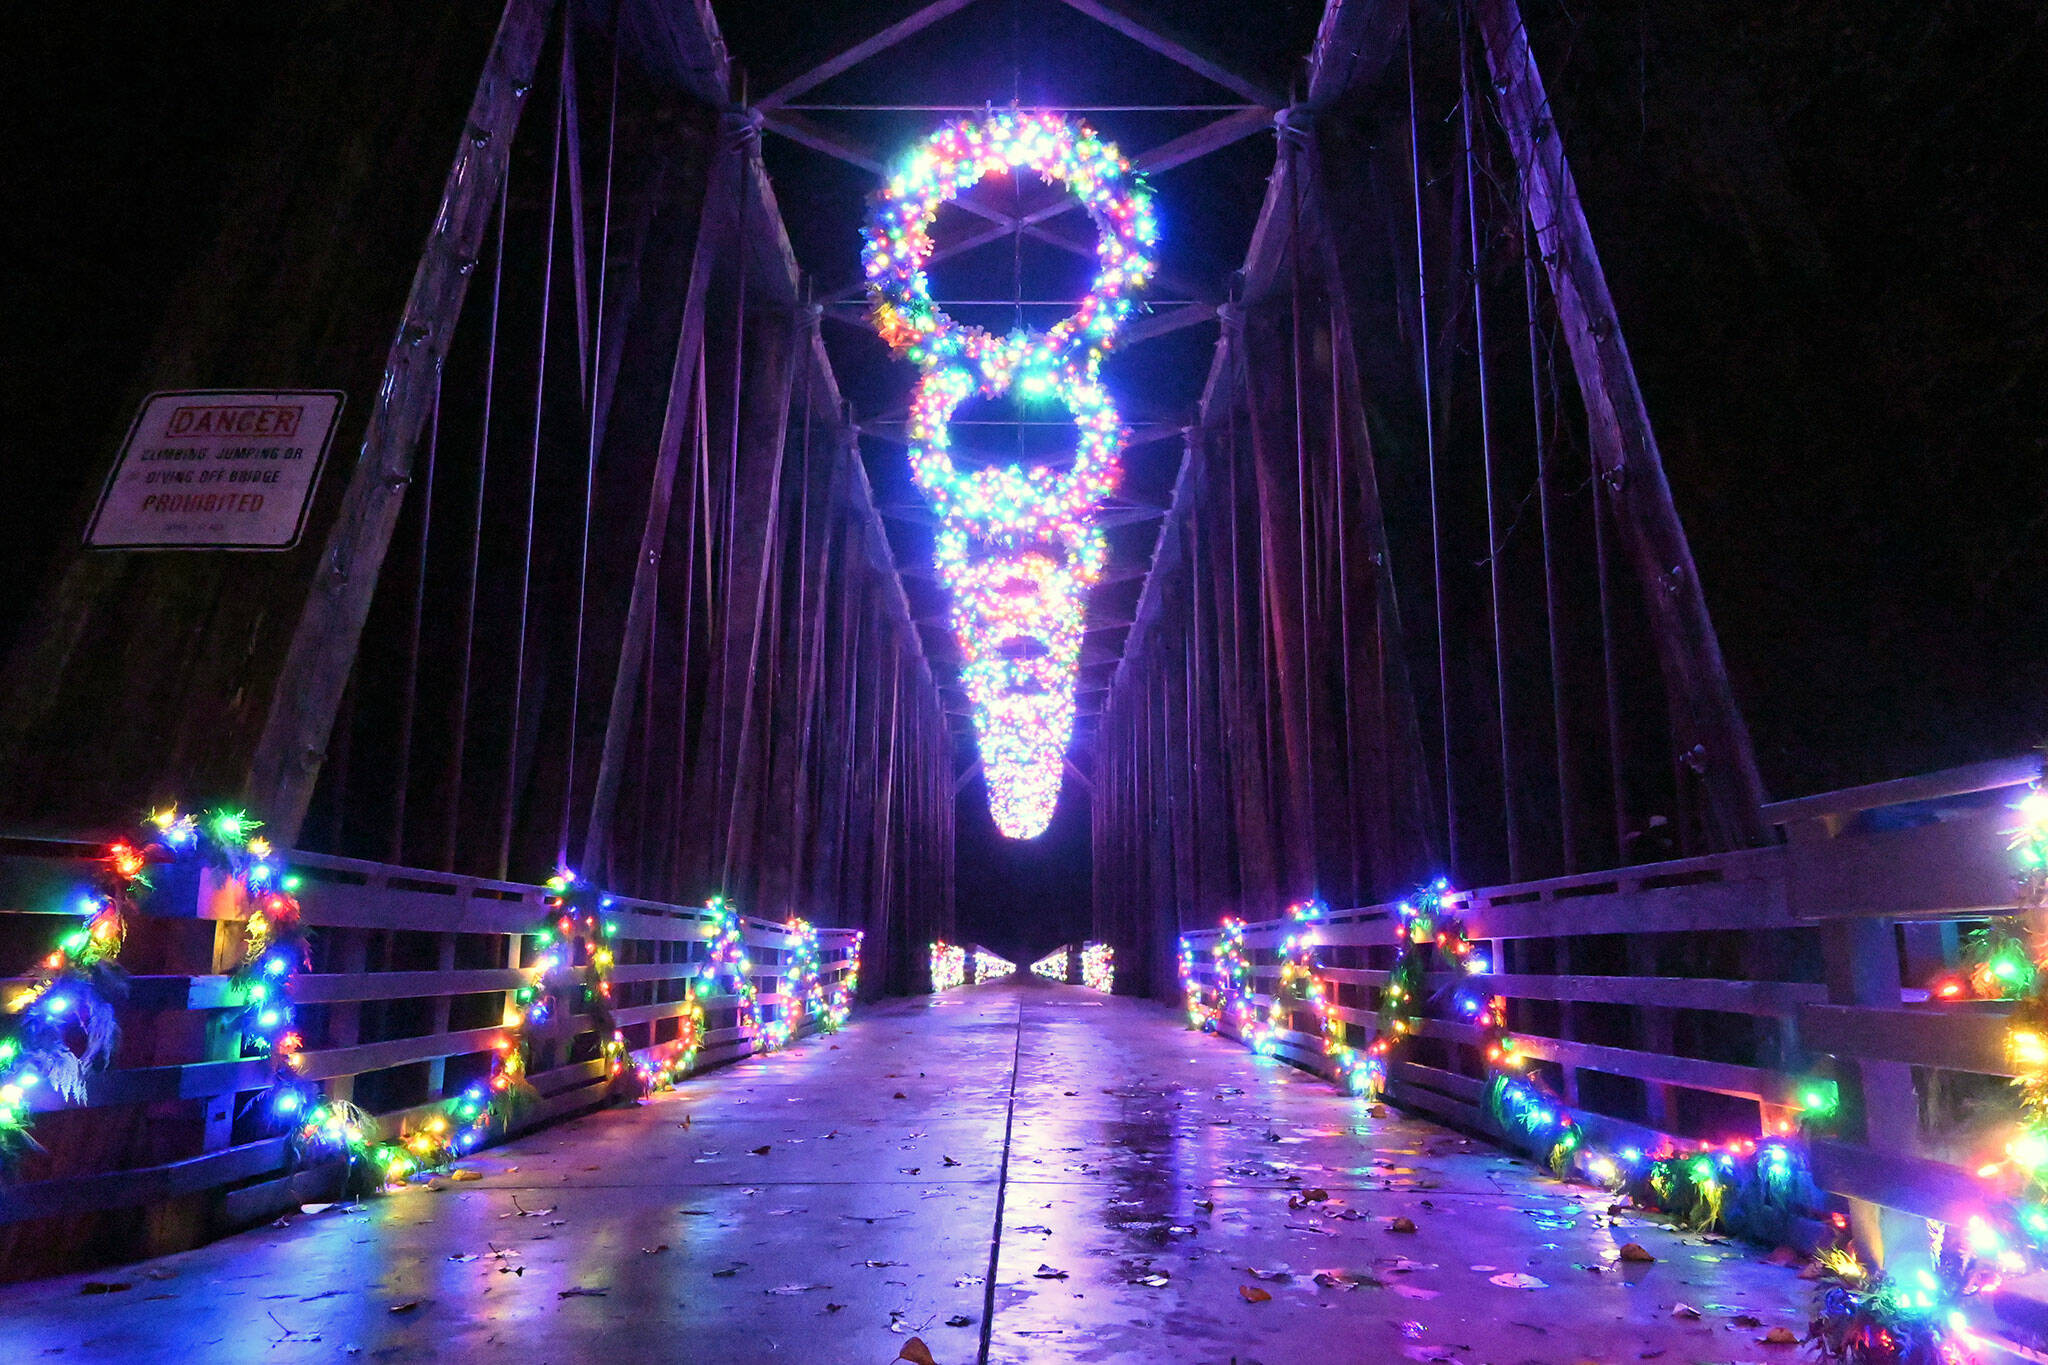 Visitors to Railroad Bridge Park enjoy the colorfully-lit historic bridge earlier this week. It’s part of a collective light display by the Jamestown S’Klallam Tribe to place 3.25 million lights around the Blyn/Dungeness/ Sequim area. (Michael Dashiell/Olympic Peninsula News Group)